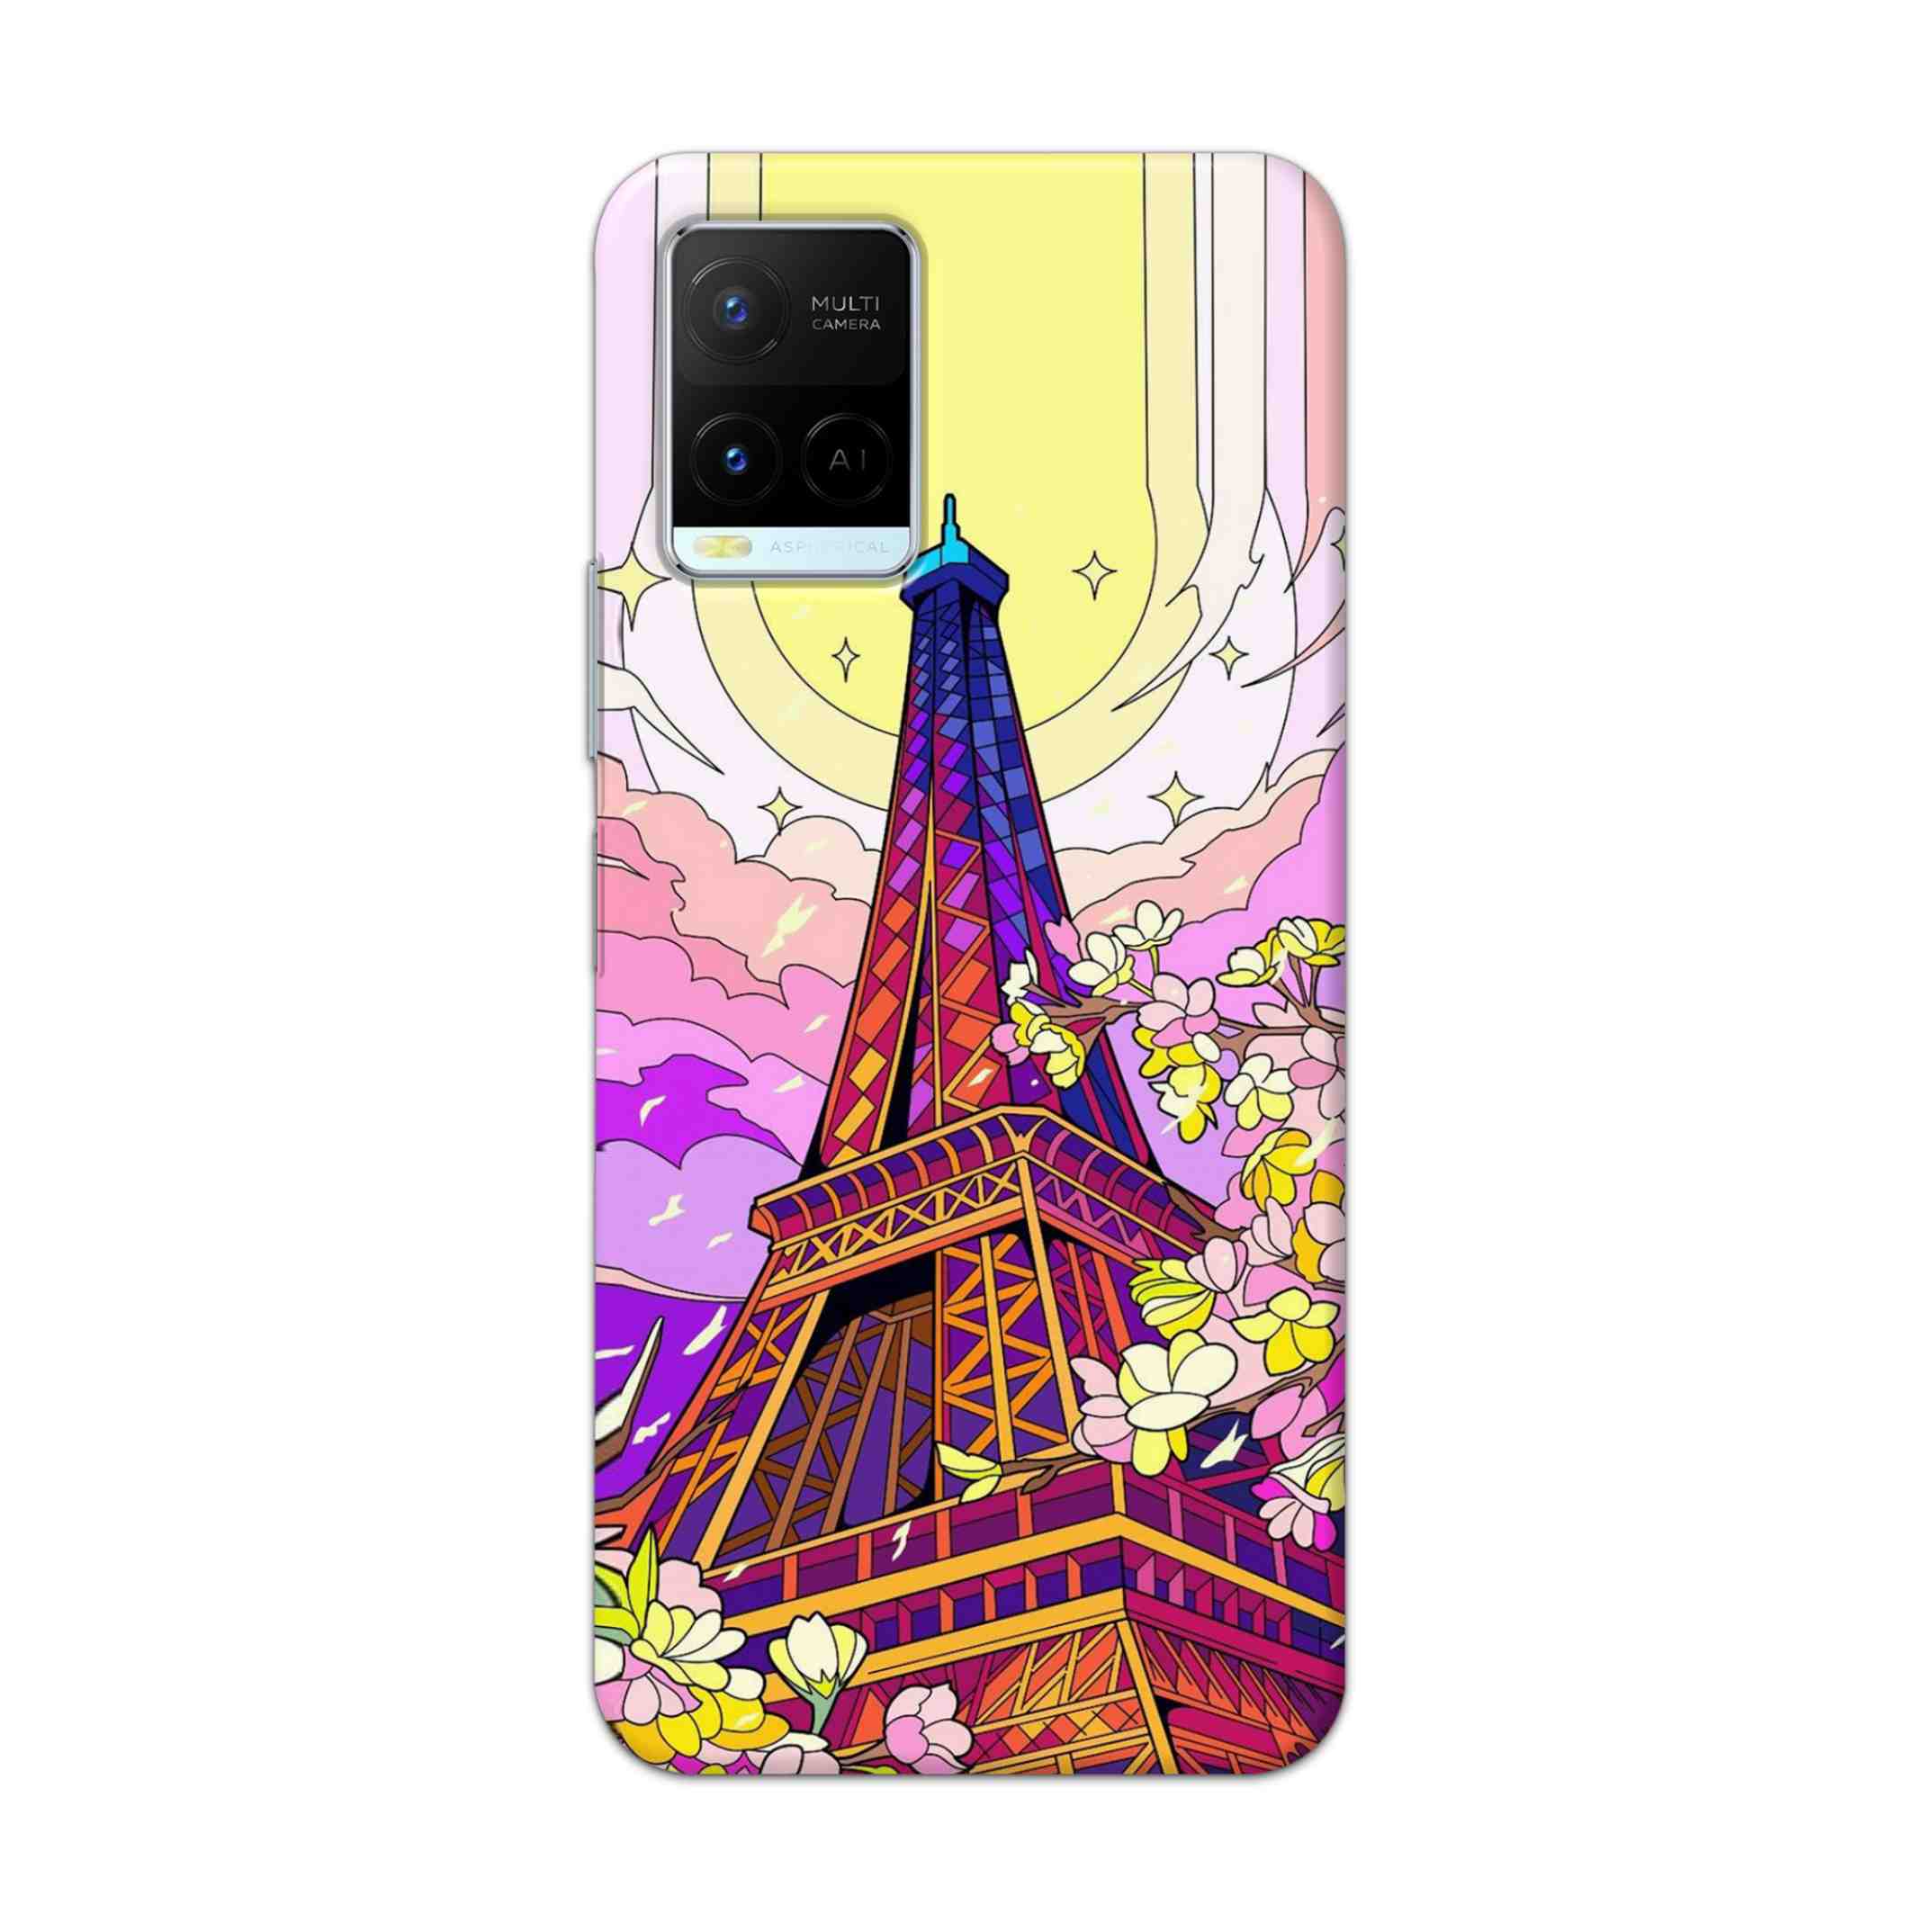 Buy Eiffel Tower Hard Back Mobile Phone Case Cover For Vivo Y21 2021 Online